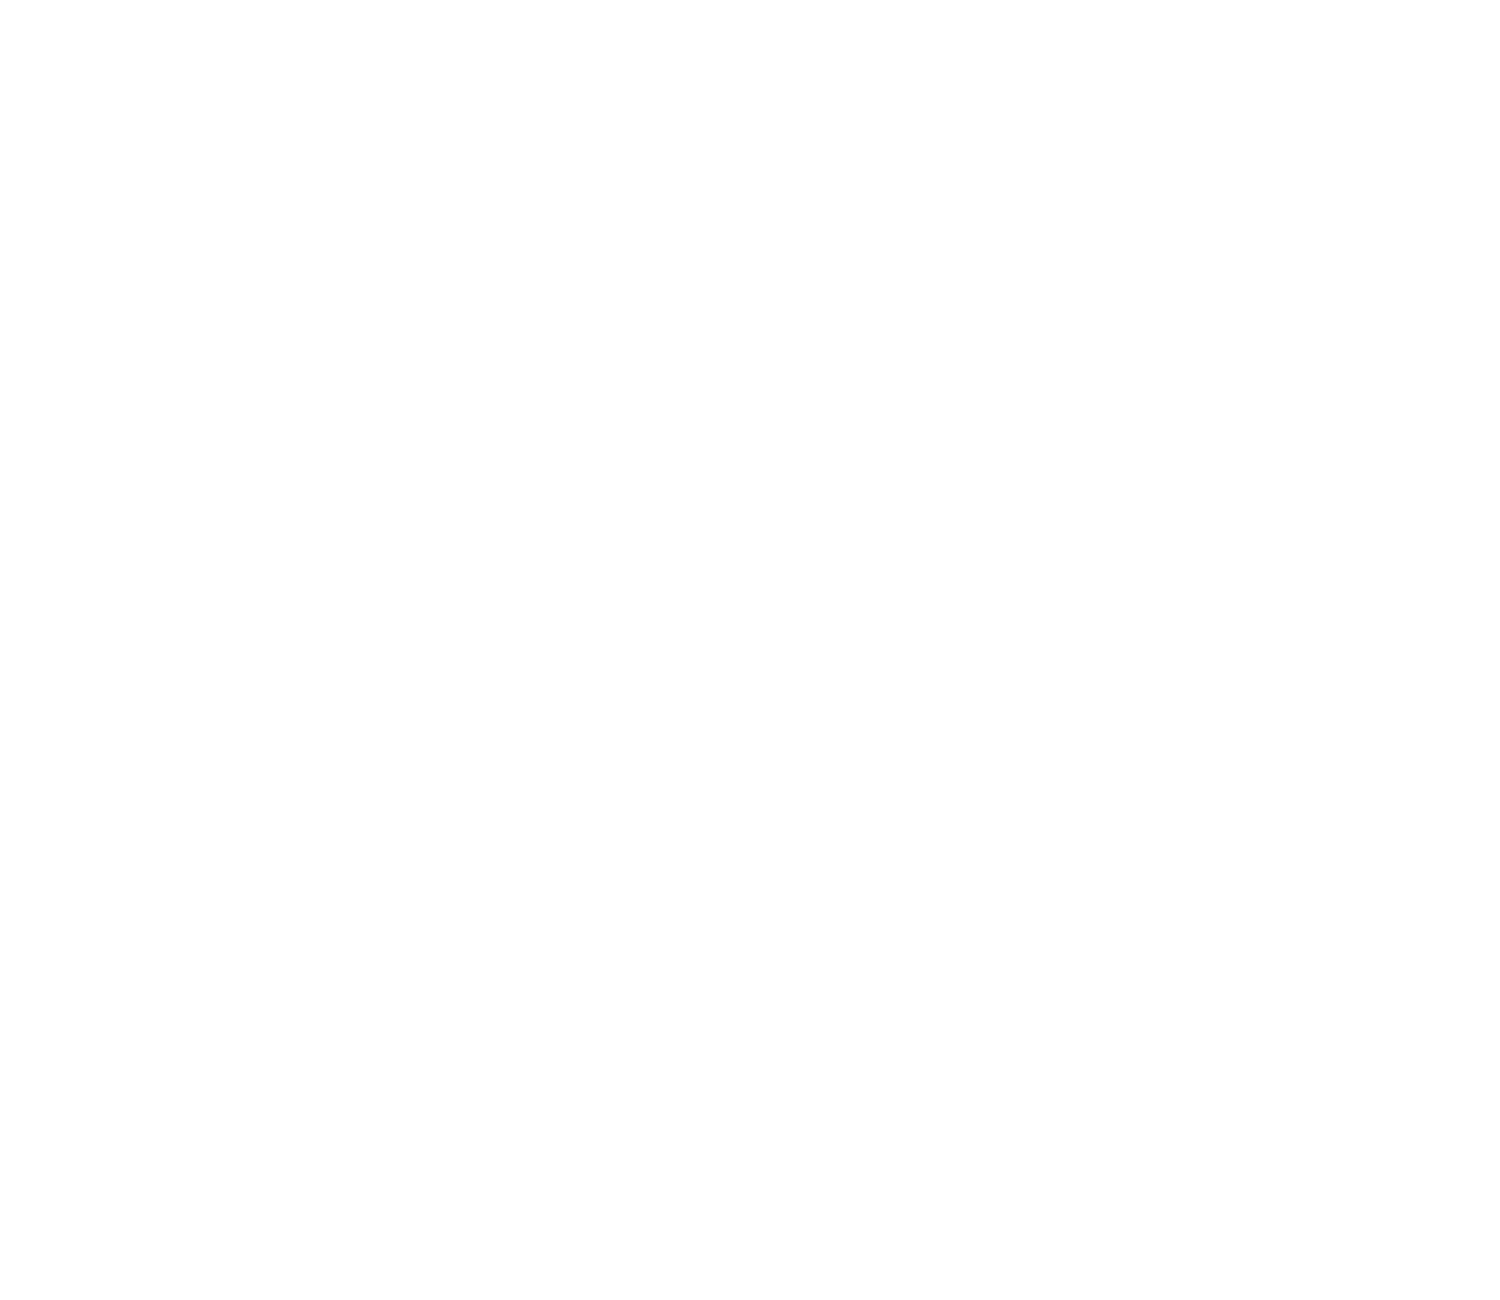 Play the Wine Card